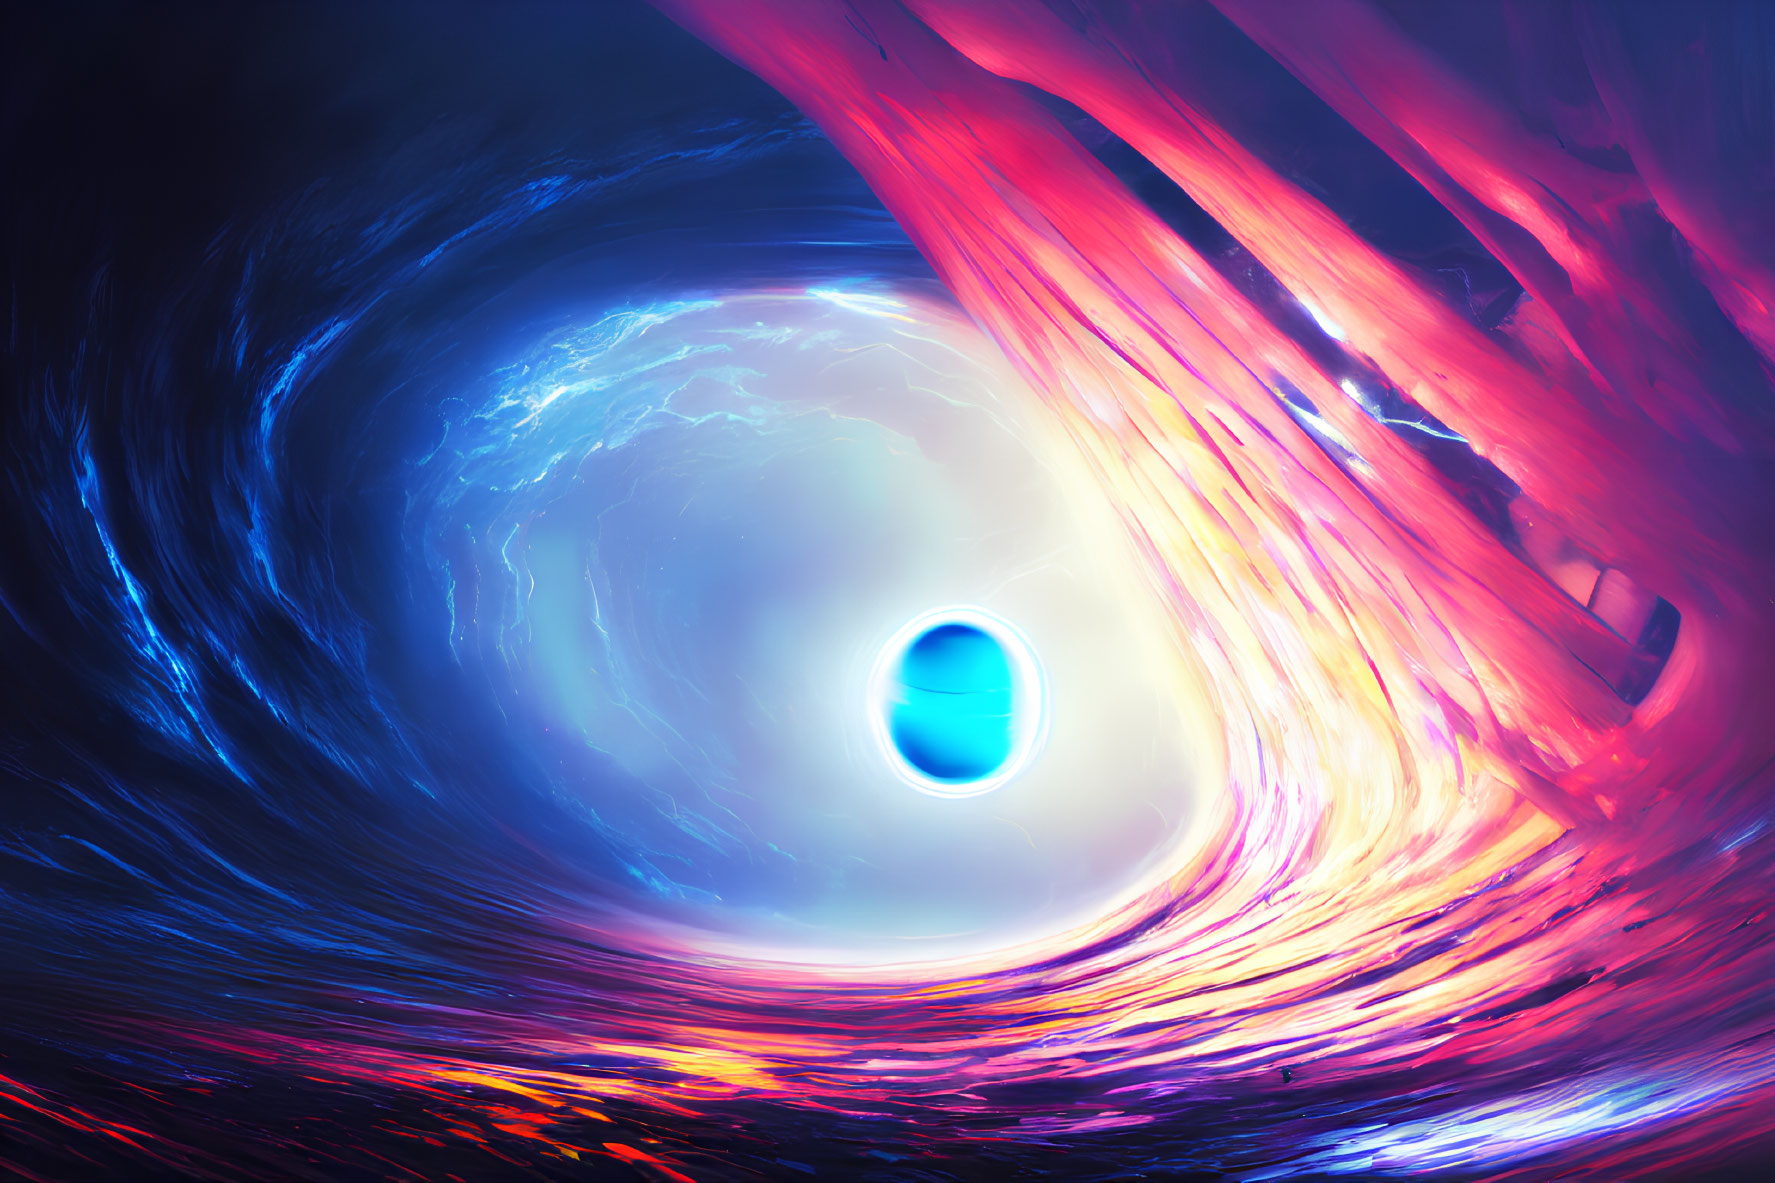 Colorful digital art of blue and pink cosmic vortex with dynamic light effects